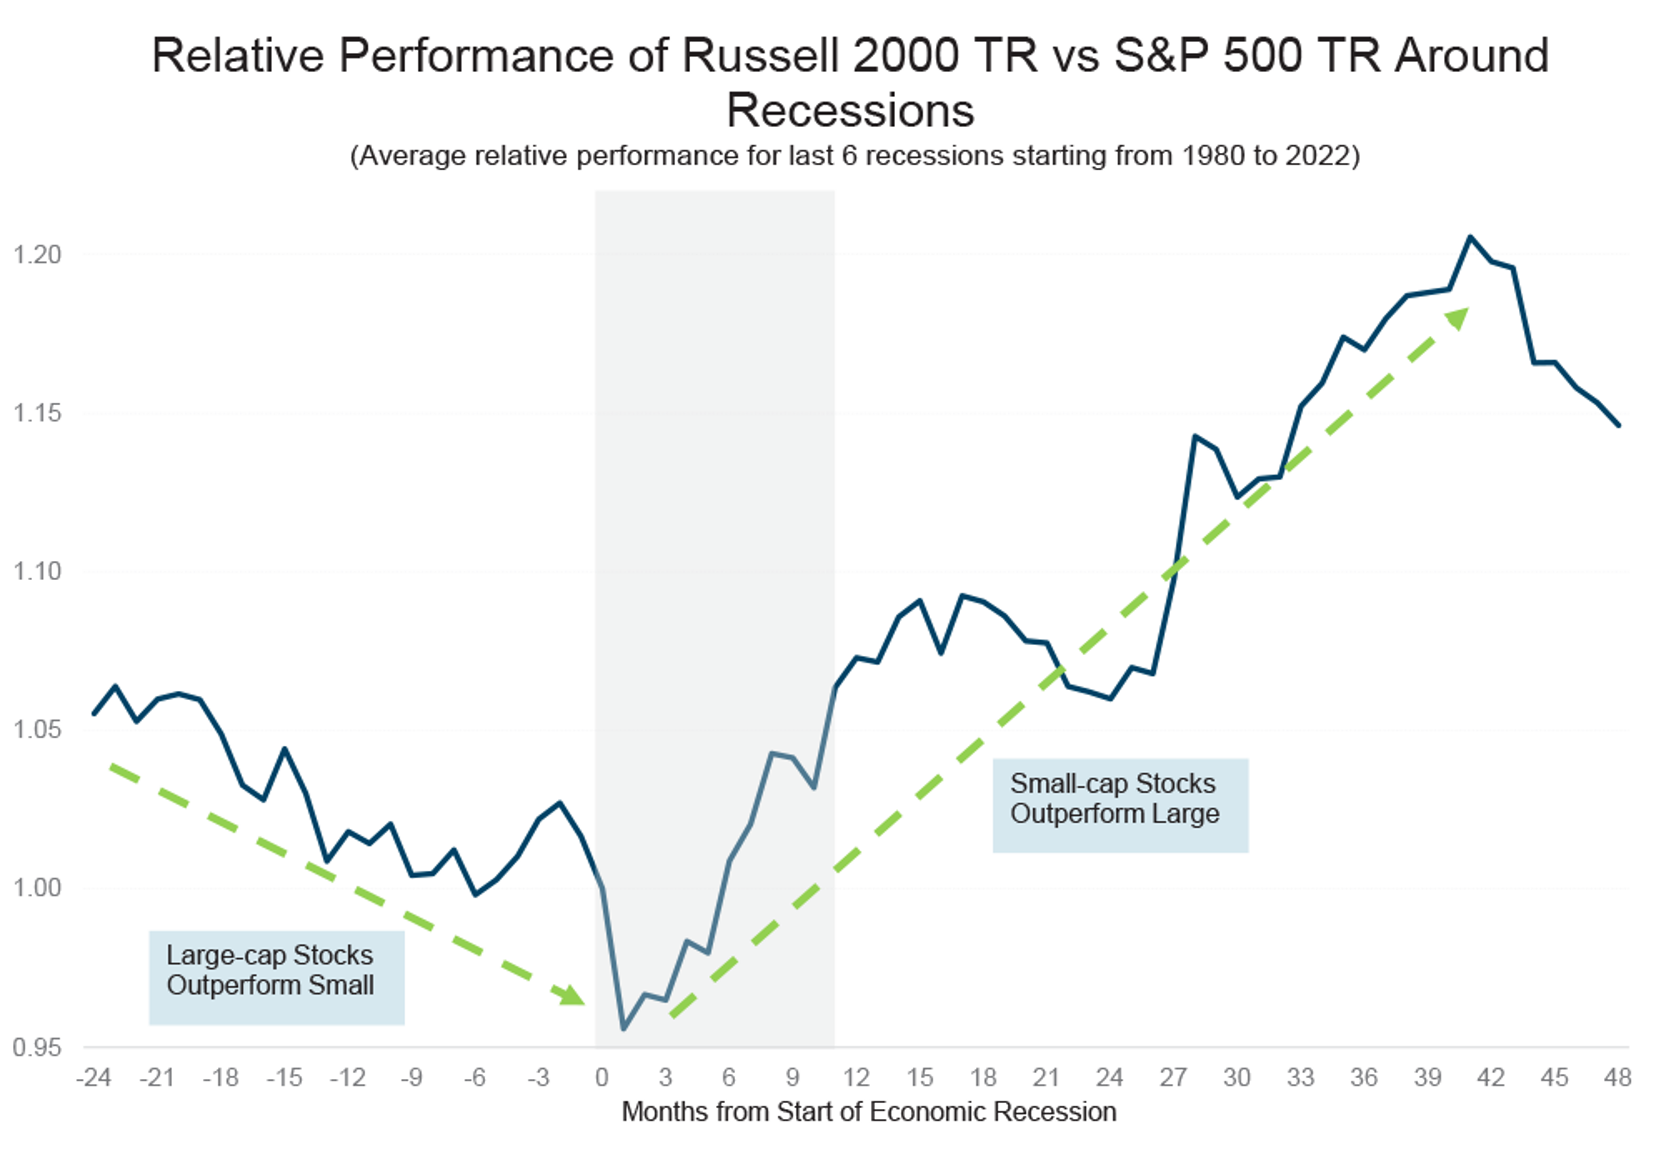 Average relative performance for the last 6 recessions starting from 1980 to 2022